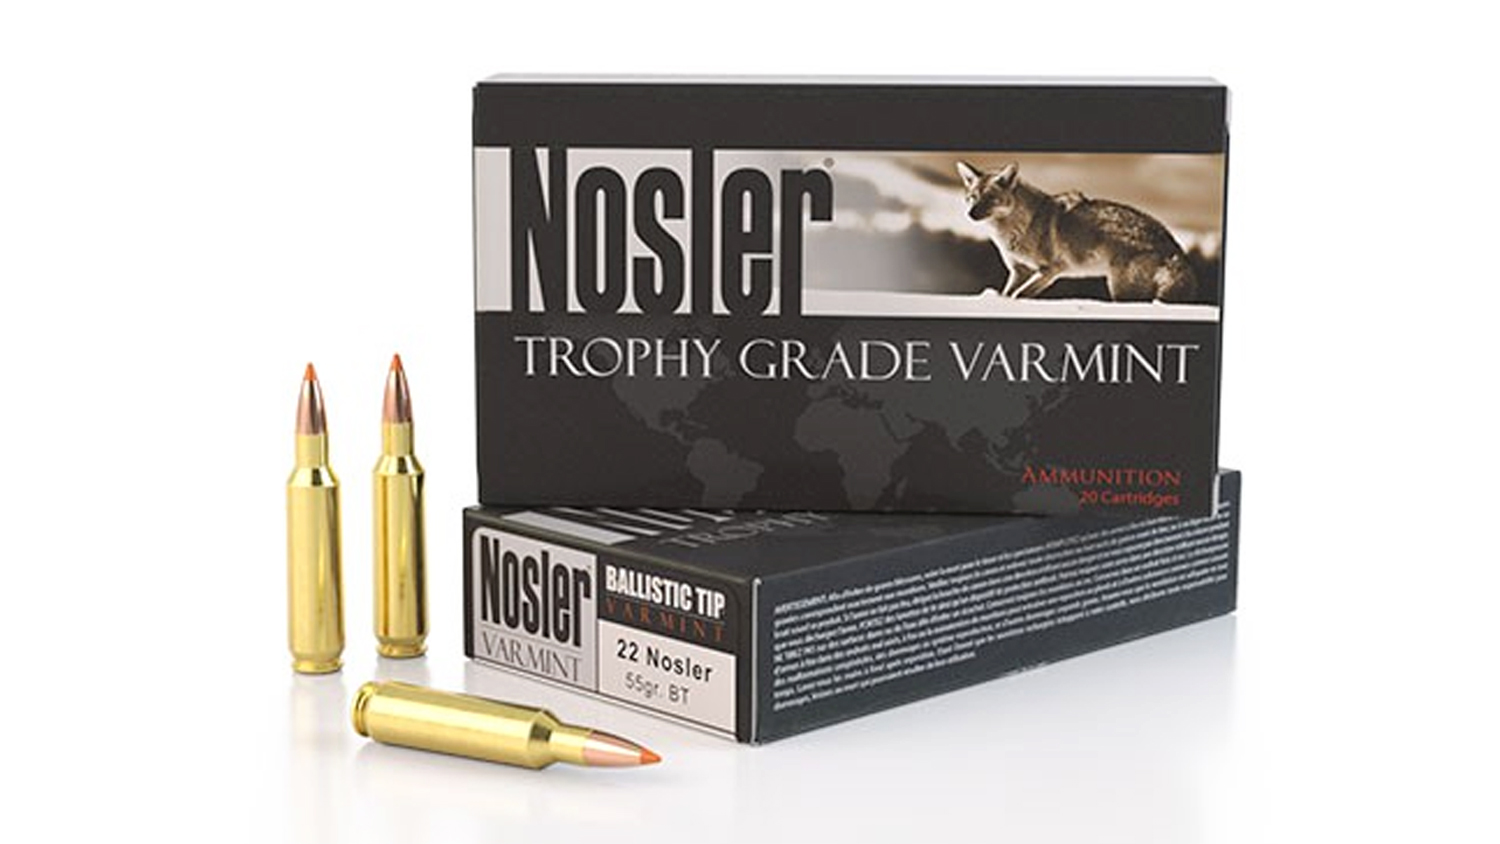 Is 22 Nosler Ready For Competition?